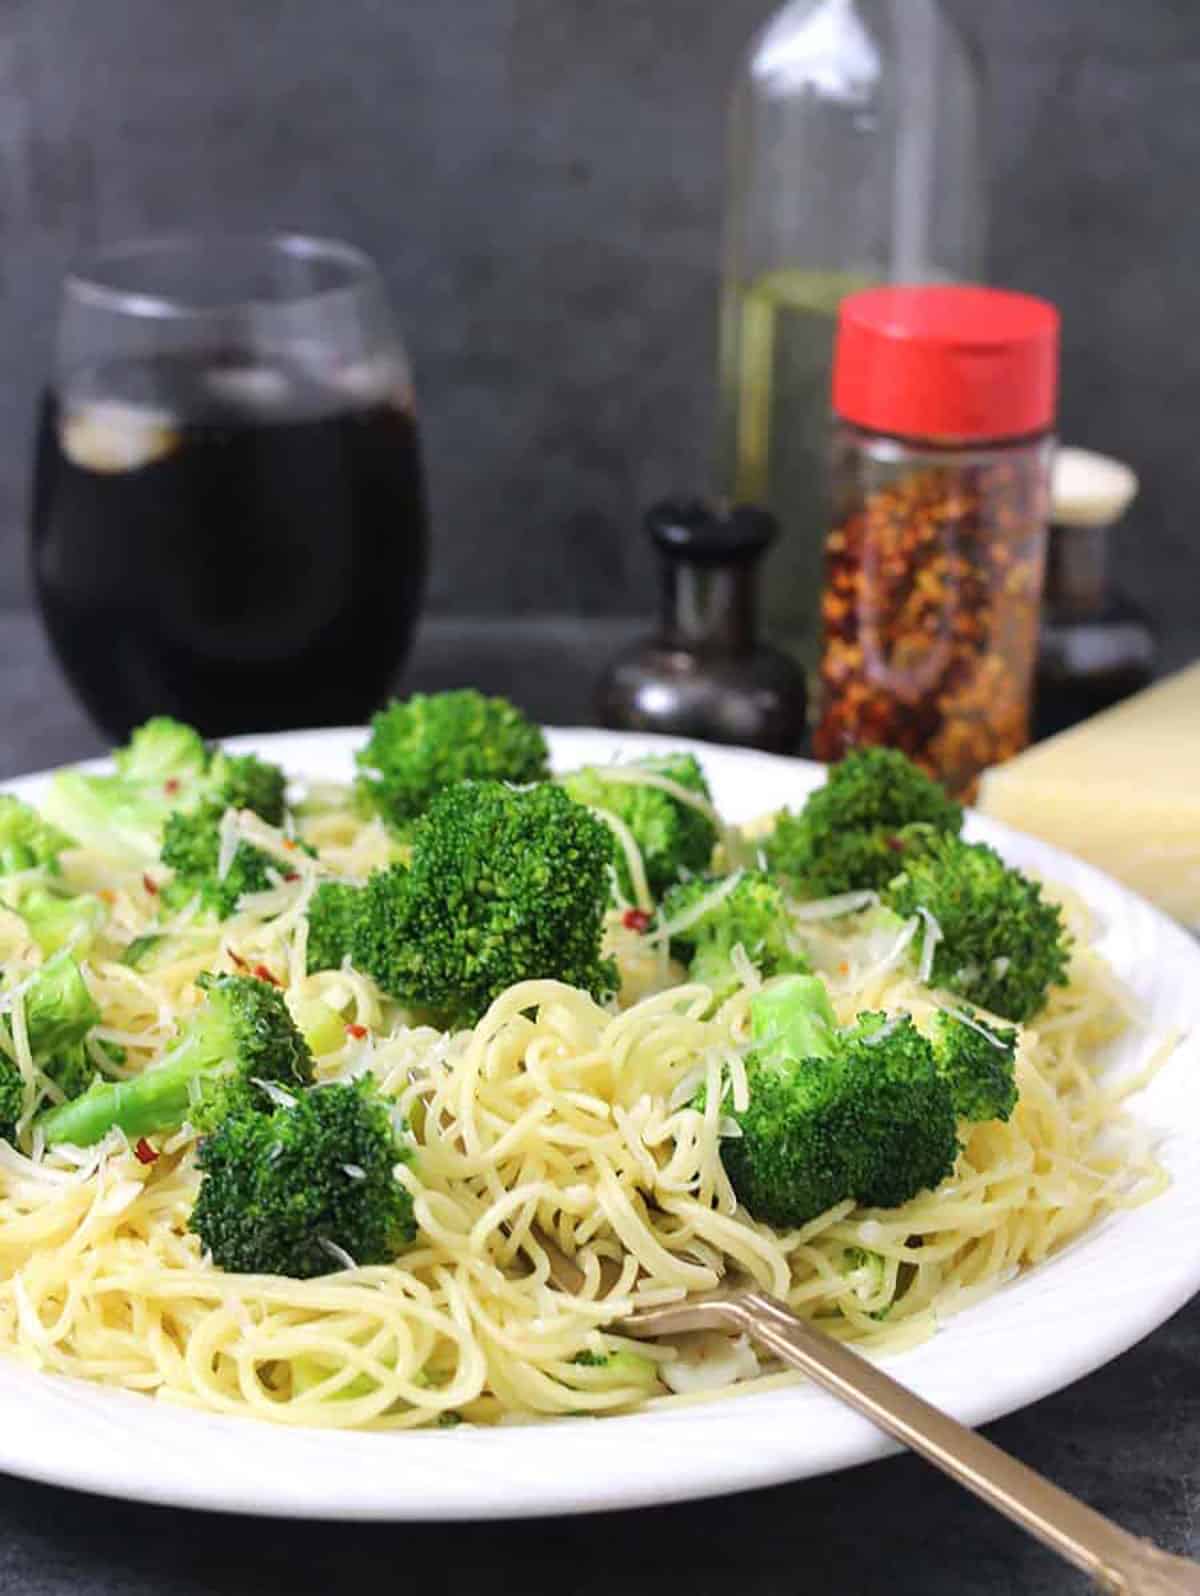 Quick angel hair pasta with garlic, broccoli, and oil for dinner or any vegetarian meal.  